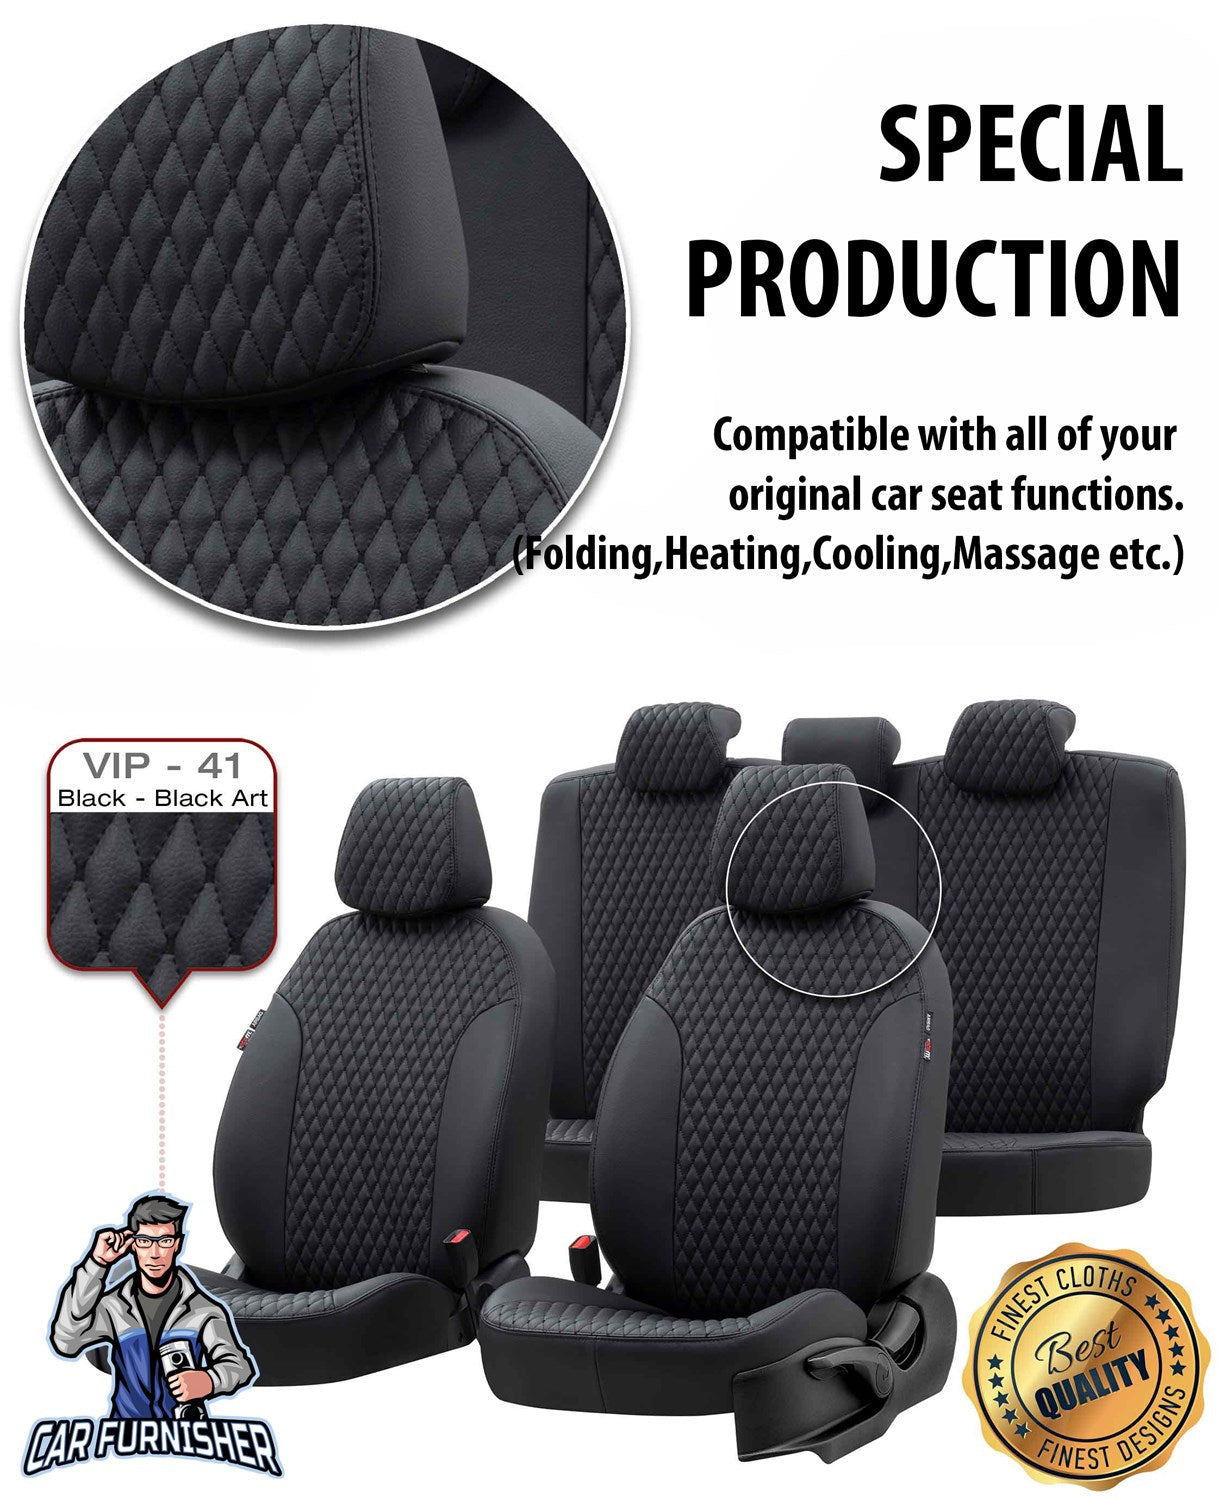 Nissan Almera Seat Covers Amsterdam Leather Design Smoked Black Leather